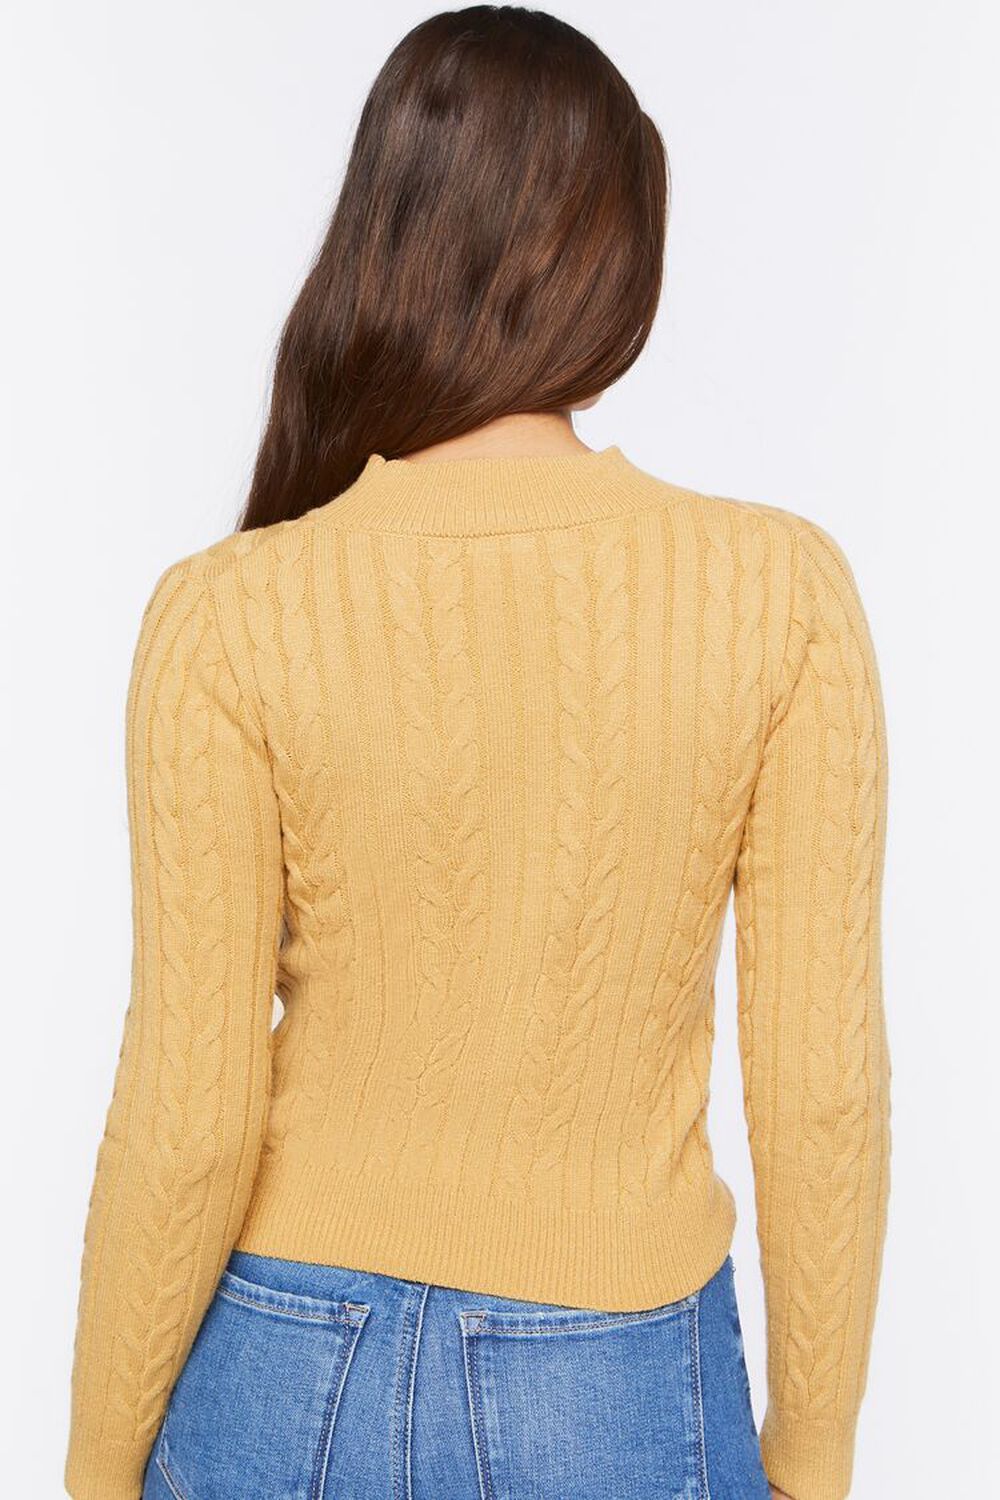 Cable Knit Cutout Crossover Sweater, image 3